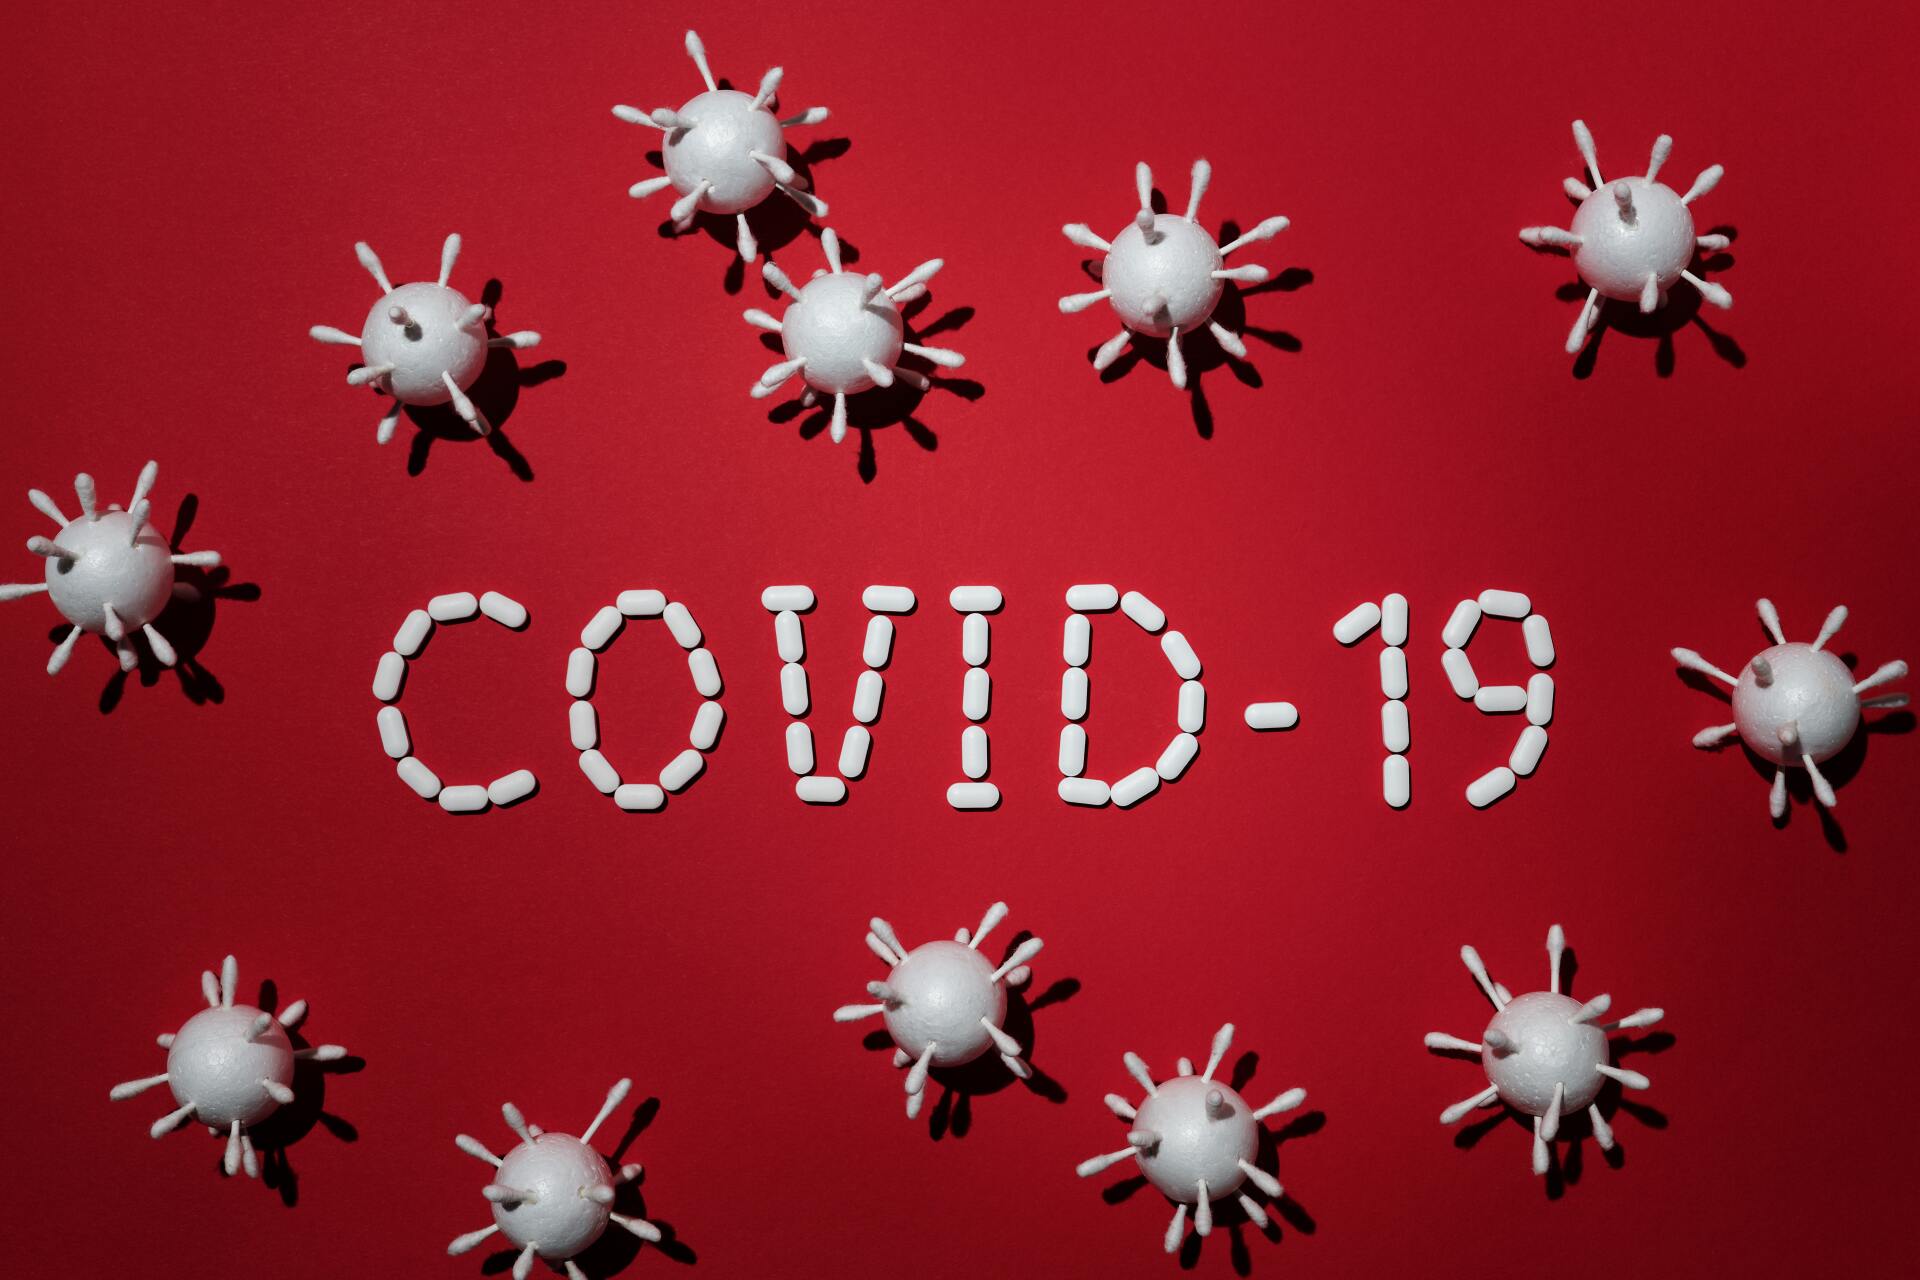 covid-19 written in medication with virus graphics